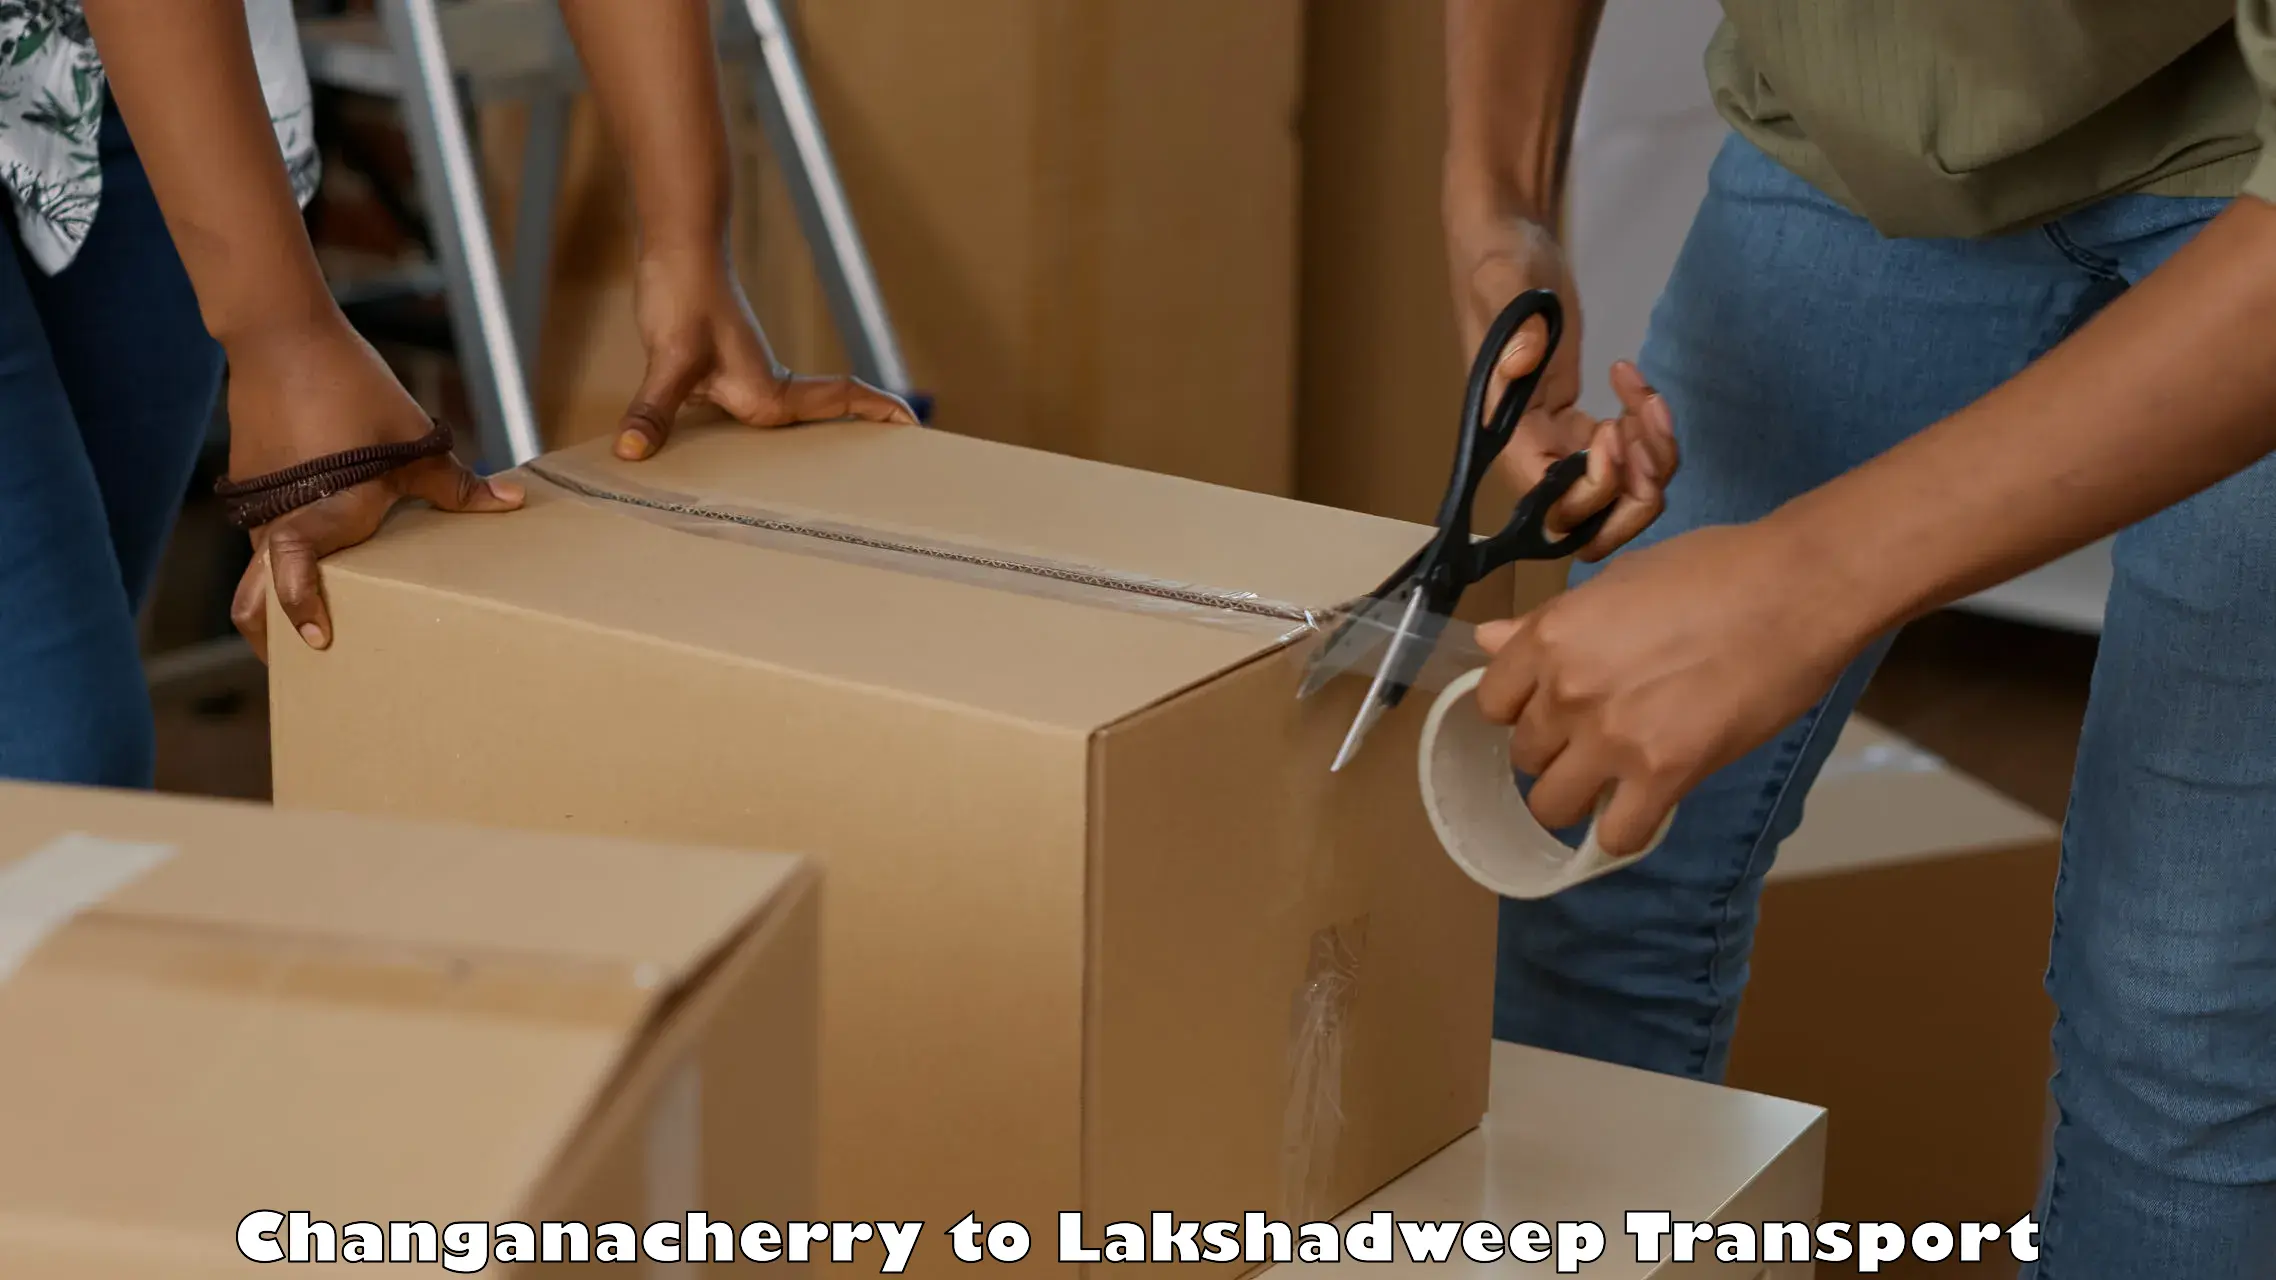 Package delivery services Changanacherry to Lakshadweep